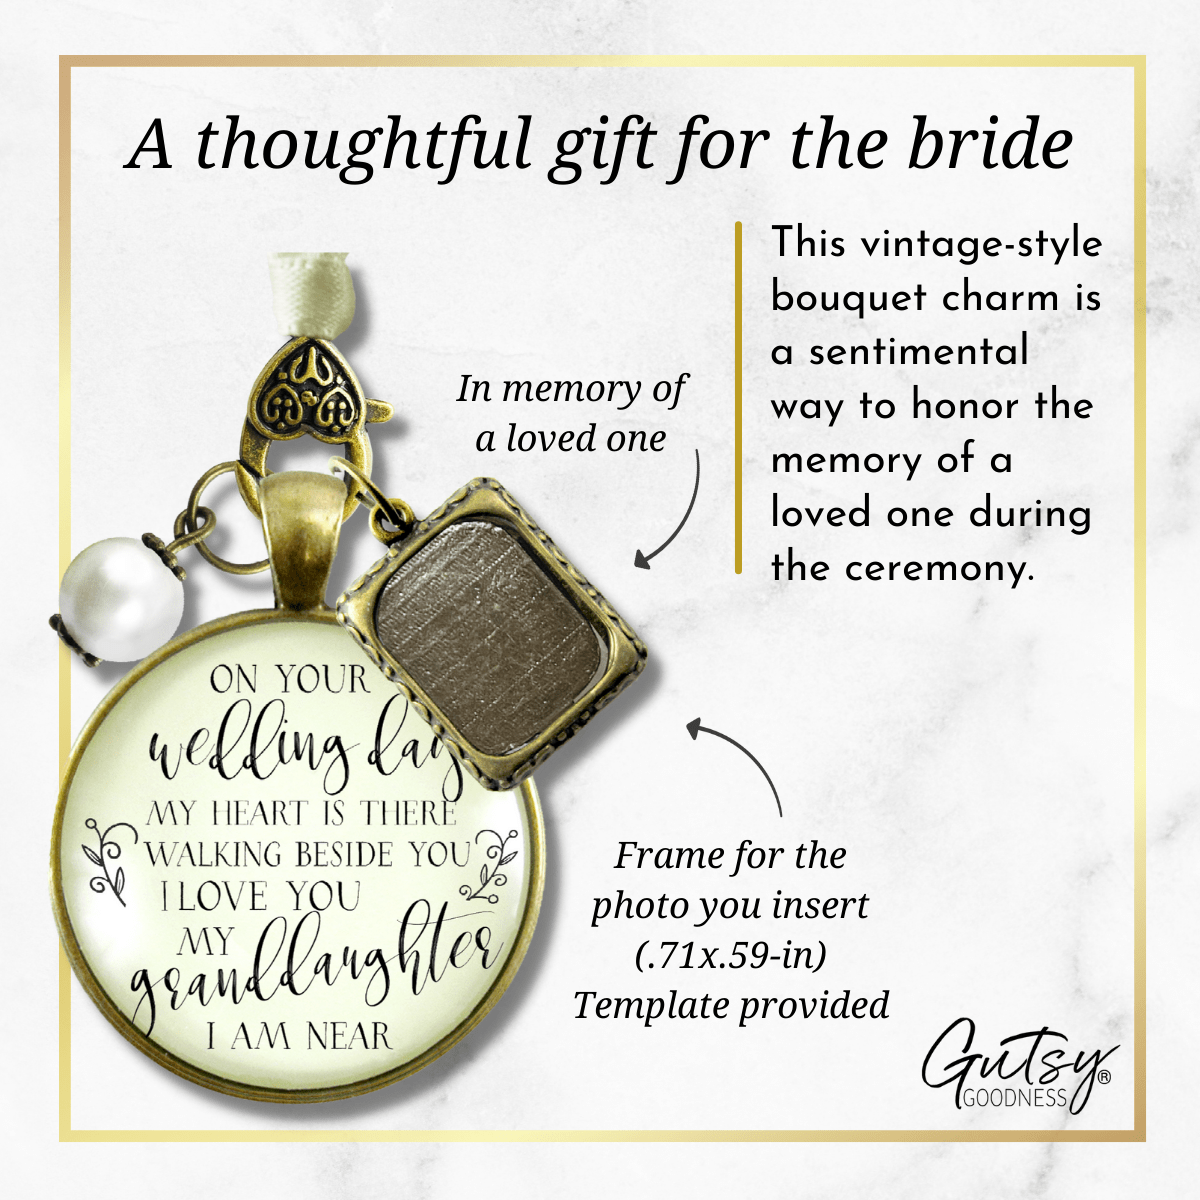 On Your Wedding Day MY Heart Is There Walking Beside You GRANDDAUGHTER - BRONZE - CREAM - WHITE BEAD